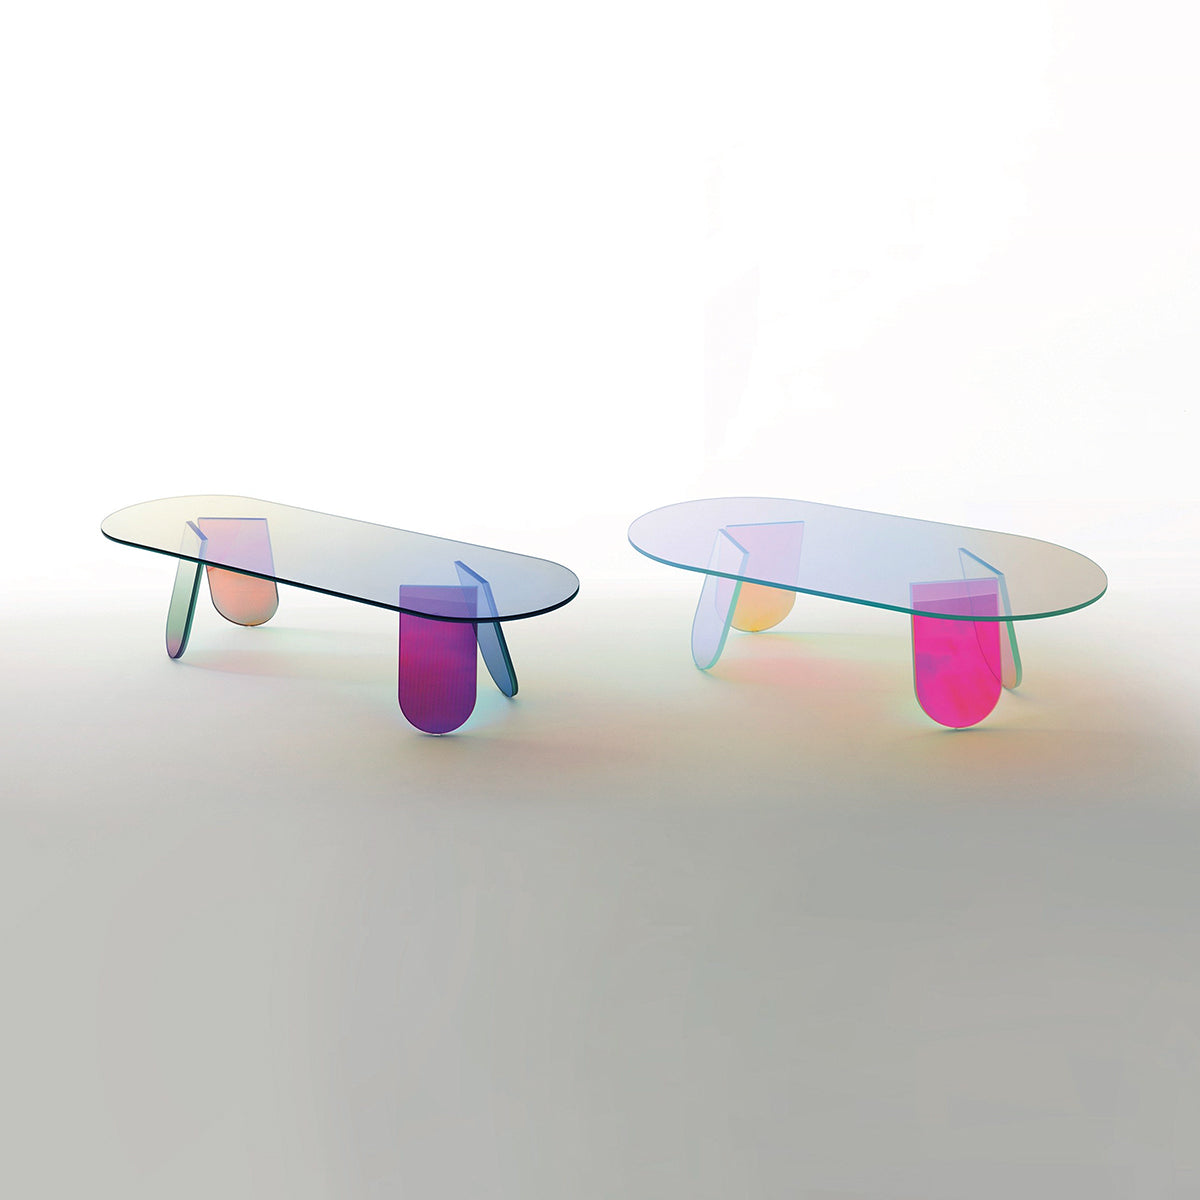 Shimmer Table  Designed by Patricia Urquiola